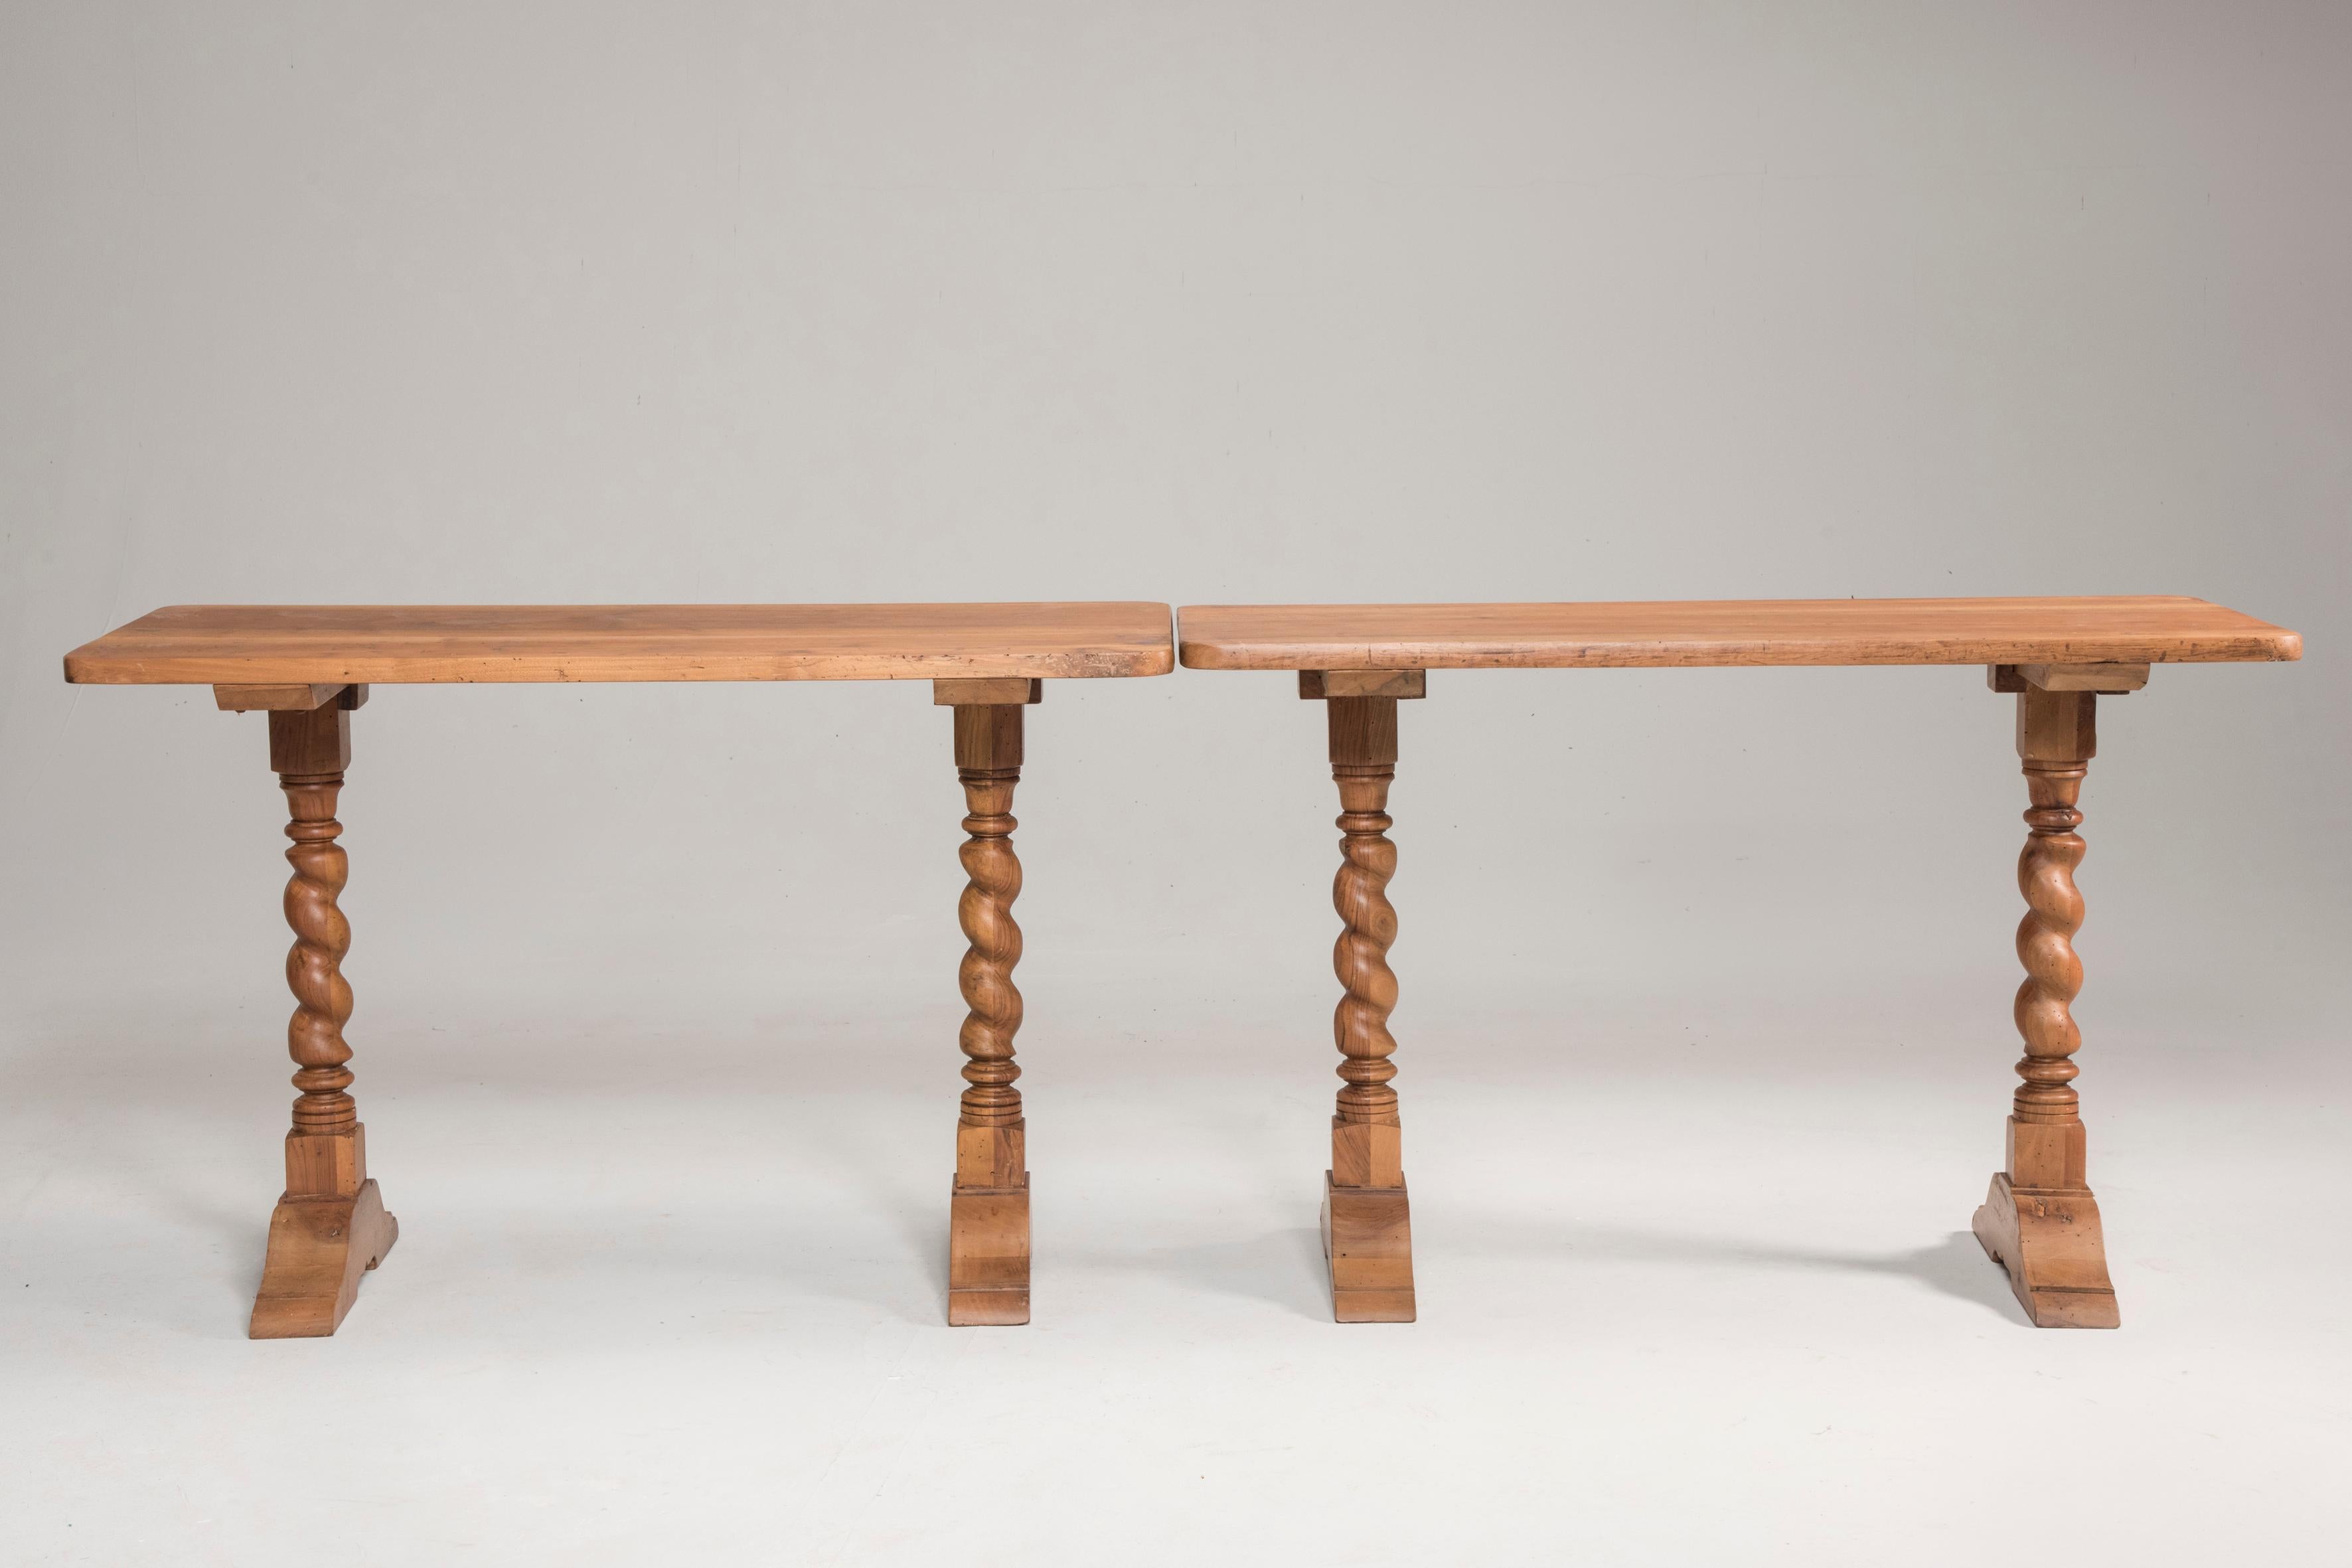 Walnut wood single top wax finishing spool legs table console. From Italy from late 19th century. Restored in conservative way. Only one available.
The most appreciable detail is the fact that the top is formed by a single piece of wood. Each table